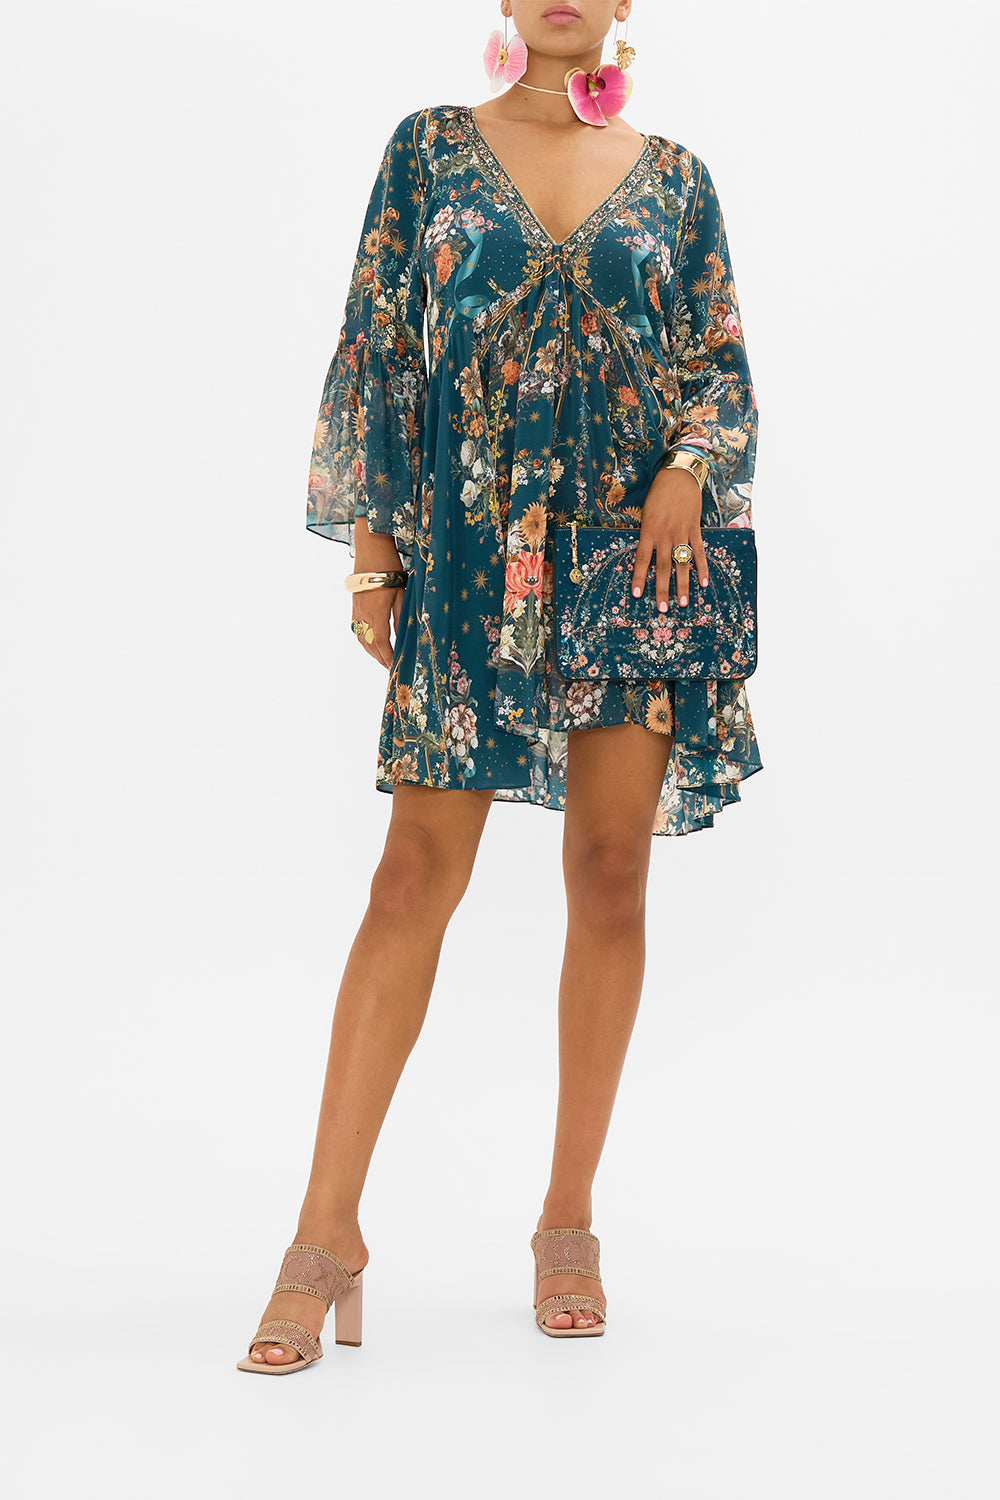 CAMILLA a line dress in She Whi Wears The Crown print